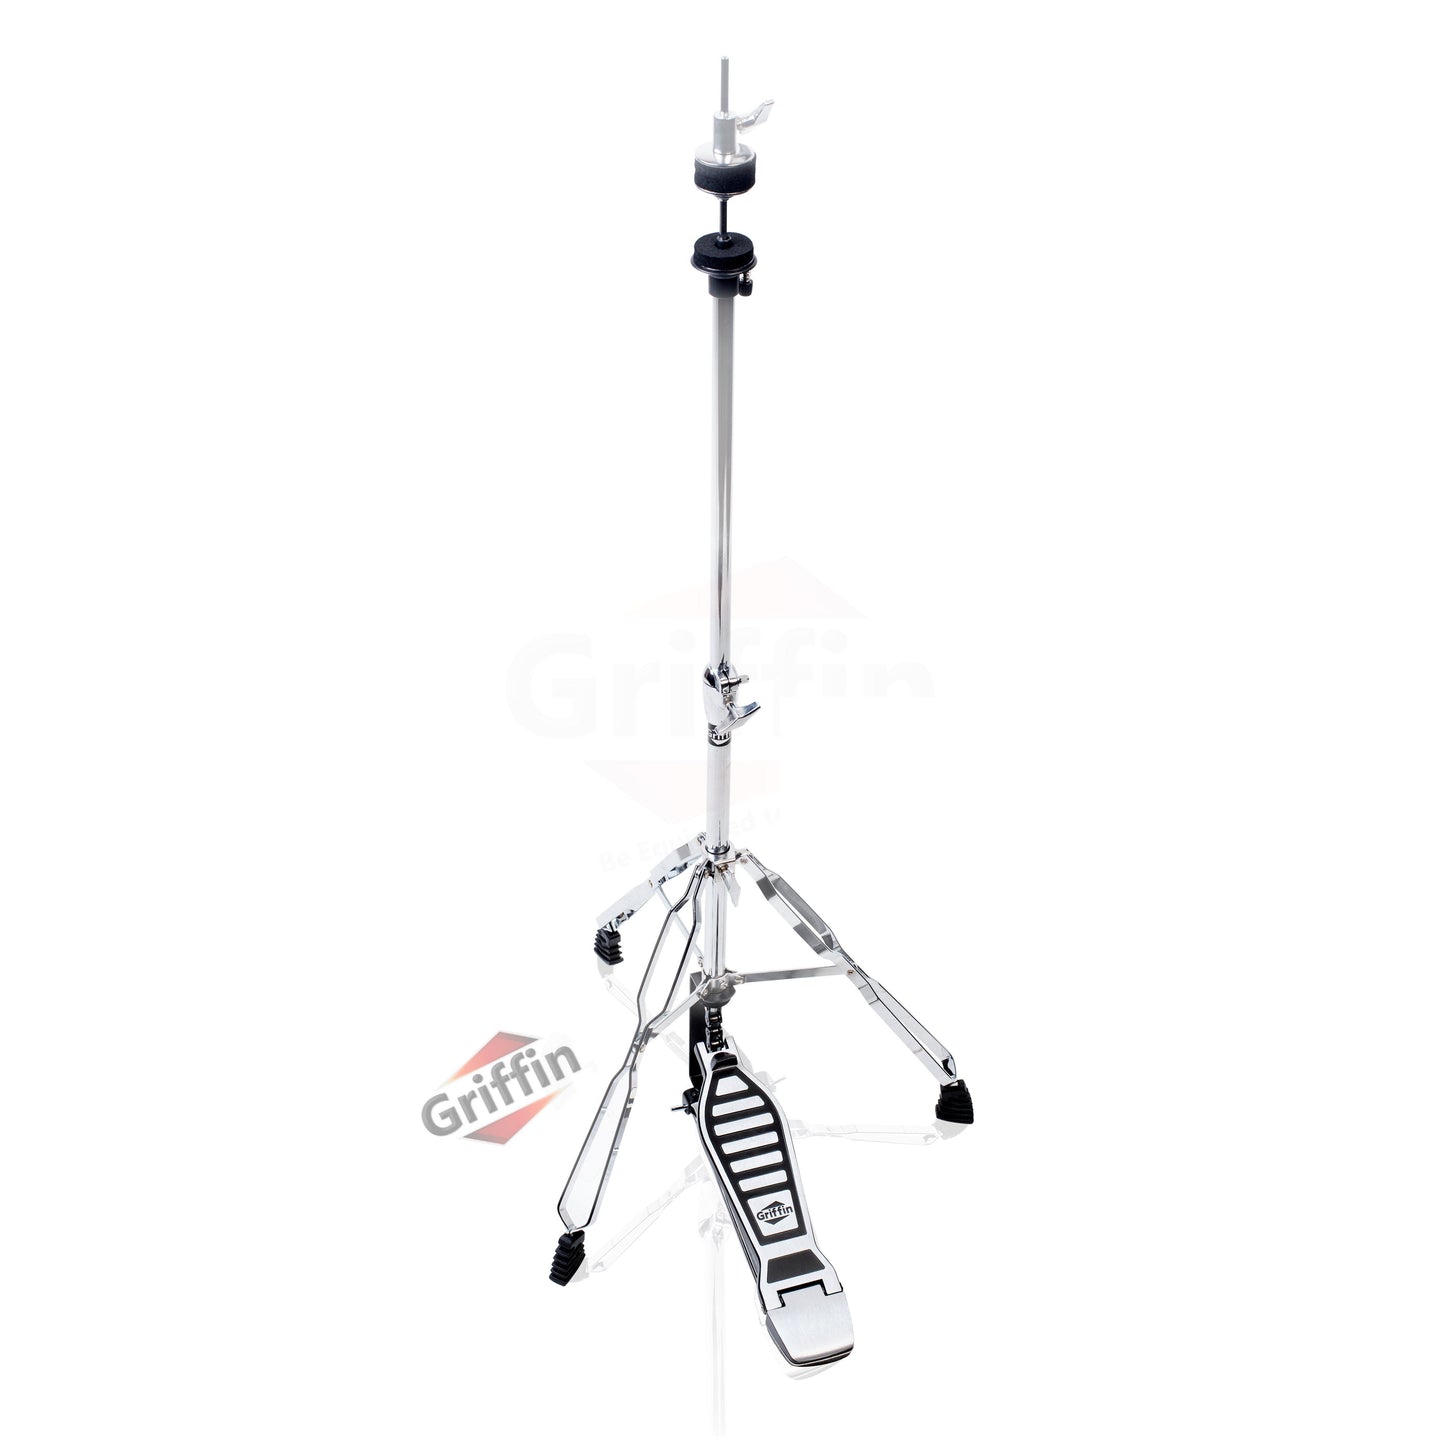 Deluxe Hi-Hat Stand by GRIFFIN - Hi Hat Cymbal Pedal With Drum Key - HiHat Mount Chrome Legs